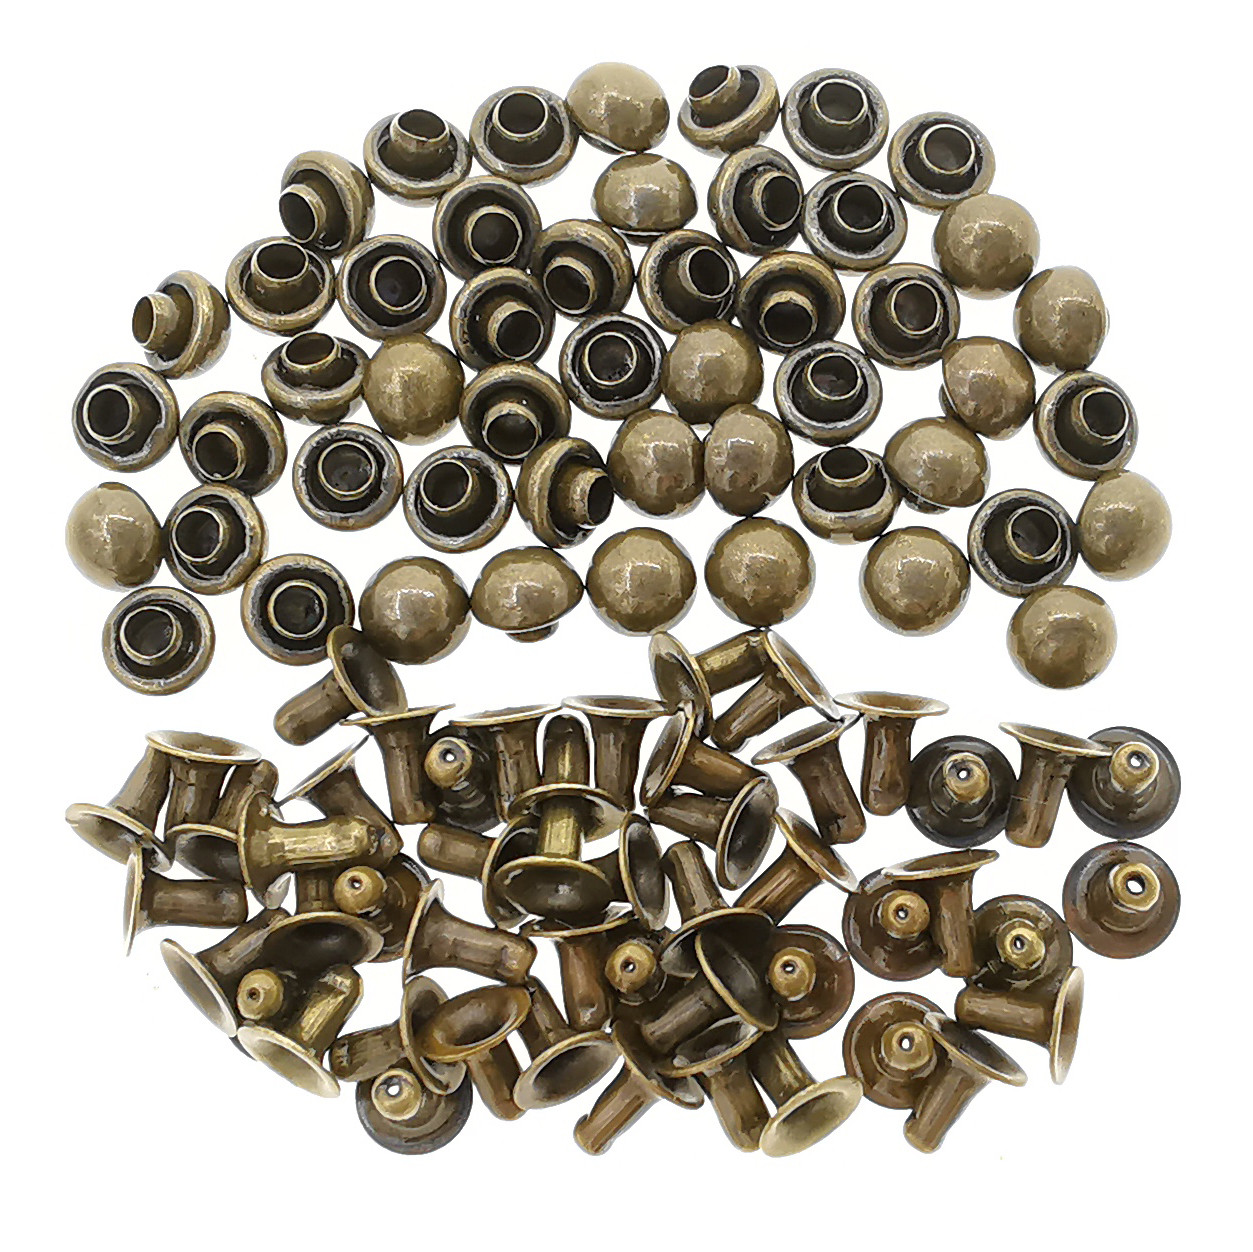 4mm Tiny Bronze Brass Dome Mushroom Round Rivets For DIY Doll Clothes  Sewing Craft 50 Sets - Releaserain